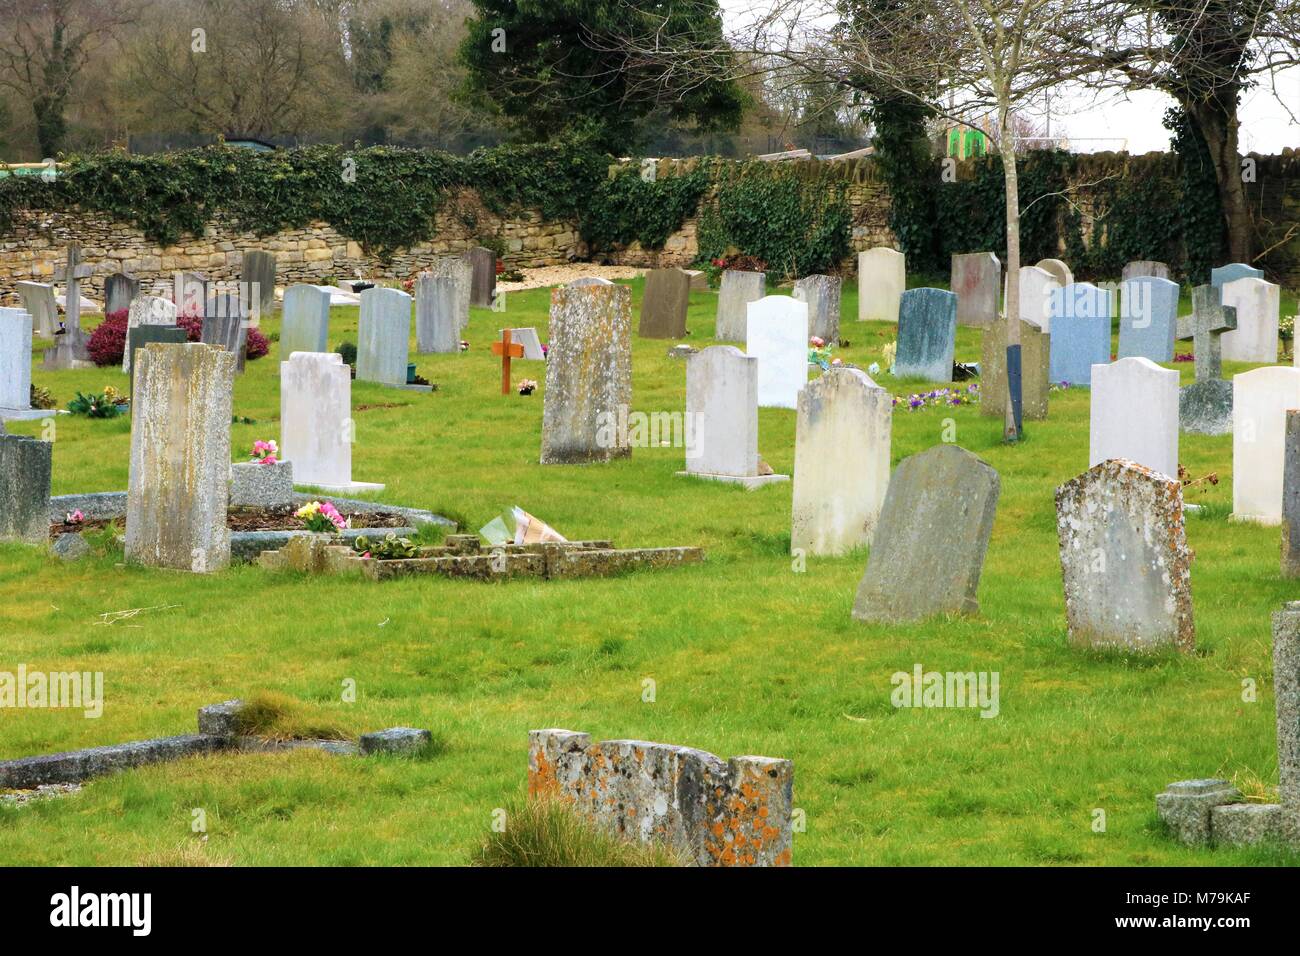 Headstones in a graveyard in Oxfordshire, UK Stock Photo